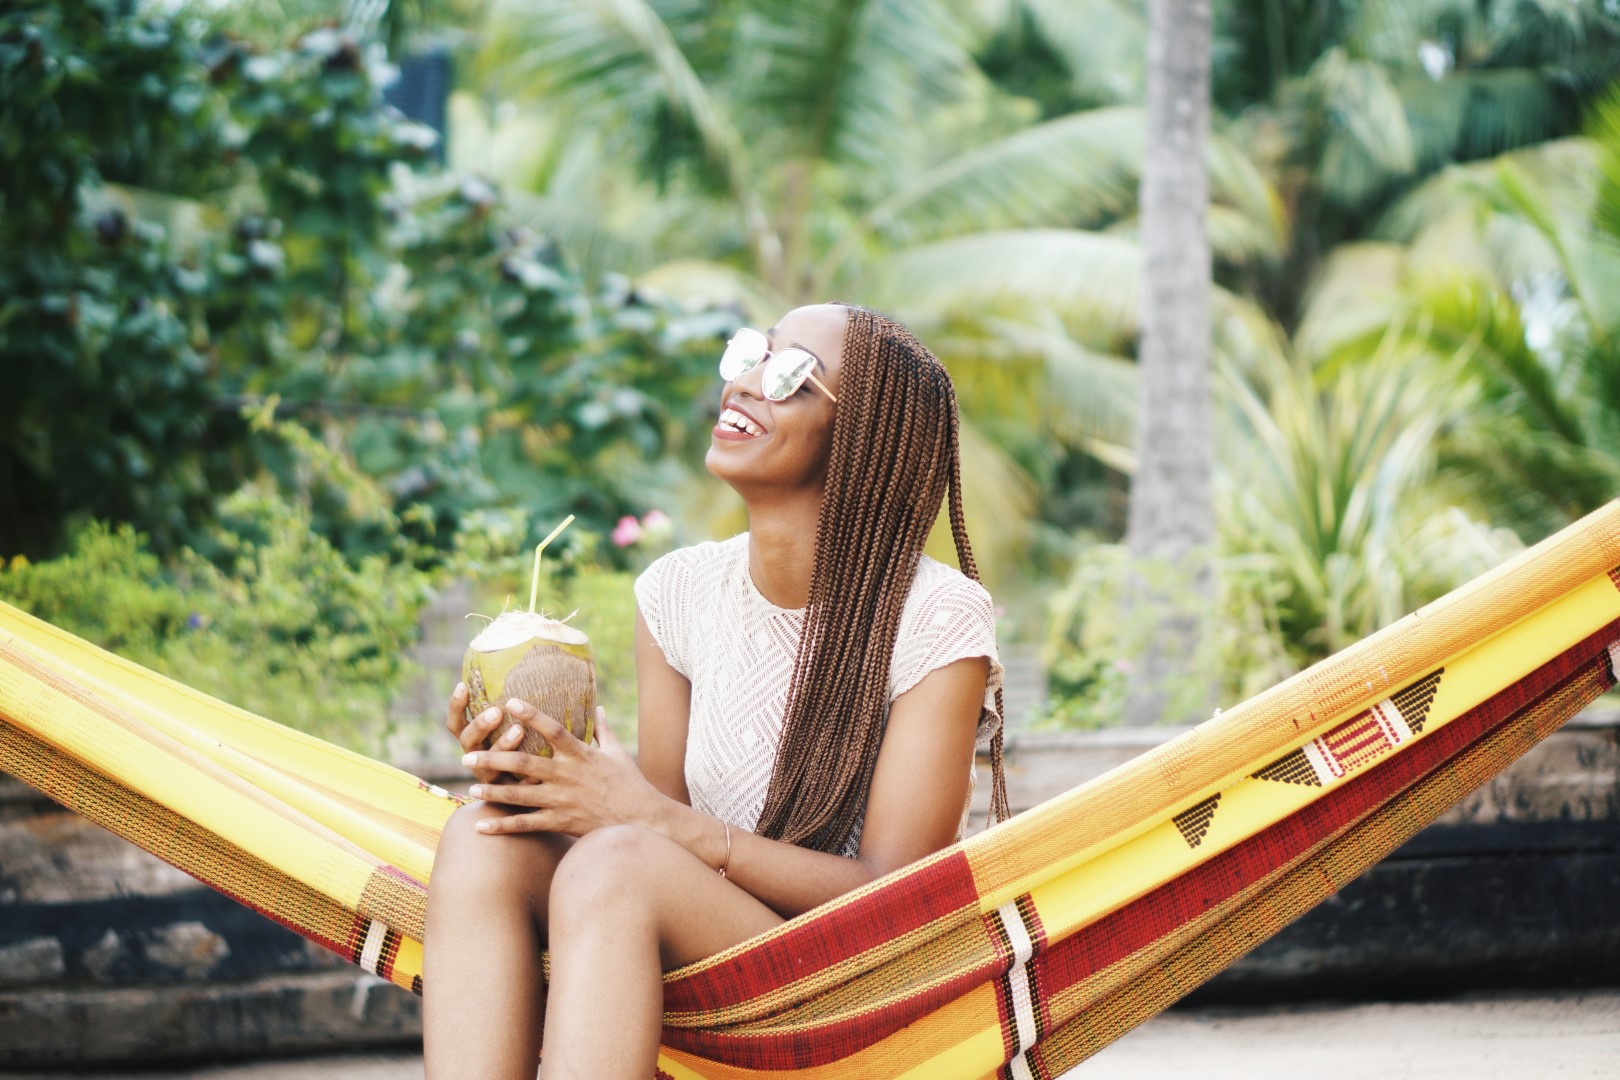 Nigerian blogger Cassie Daves in a hammock holding a coconut